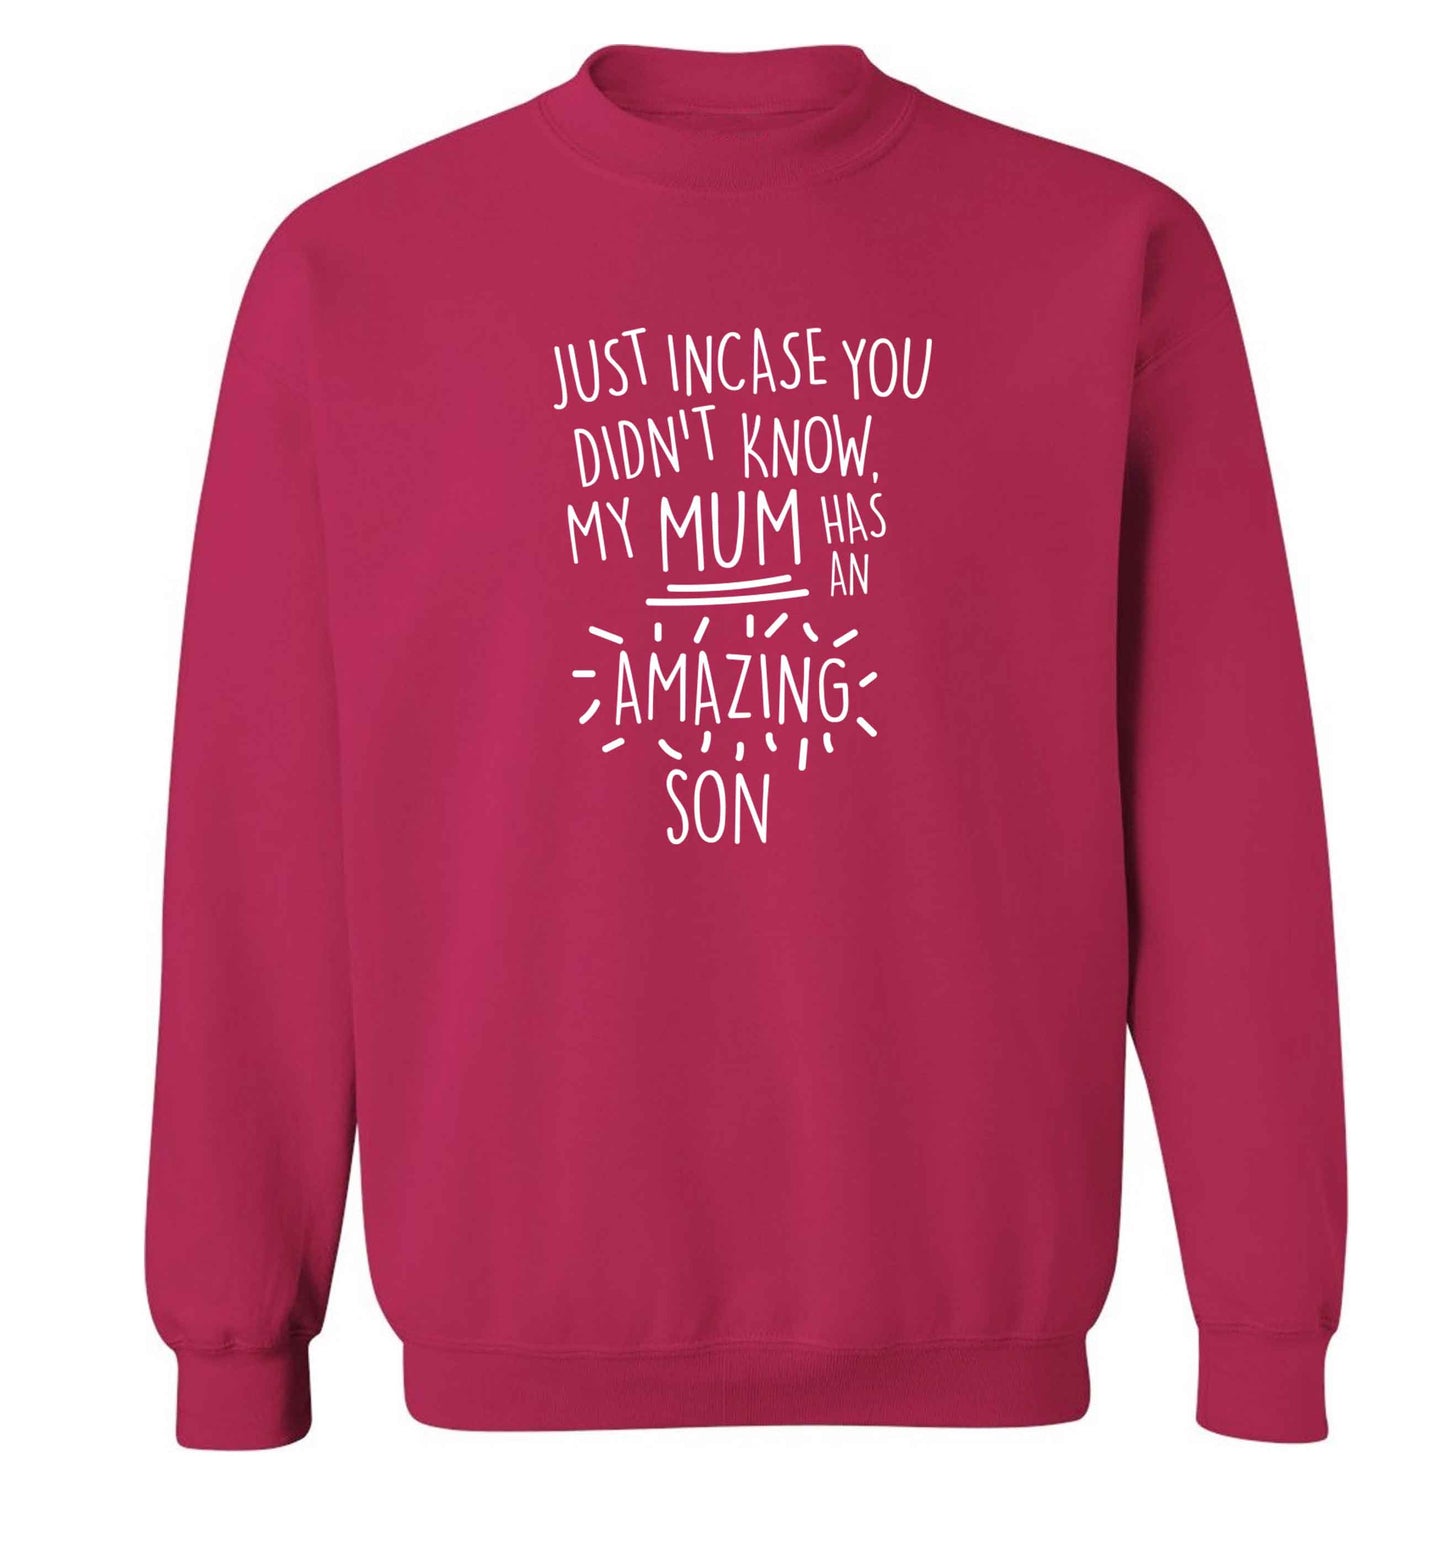 Just incase you didn't know my mum has an amazing son adult's unisex pink sweater 2XL